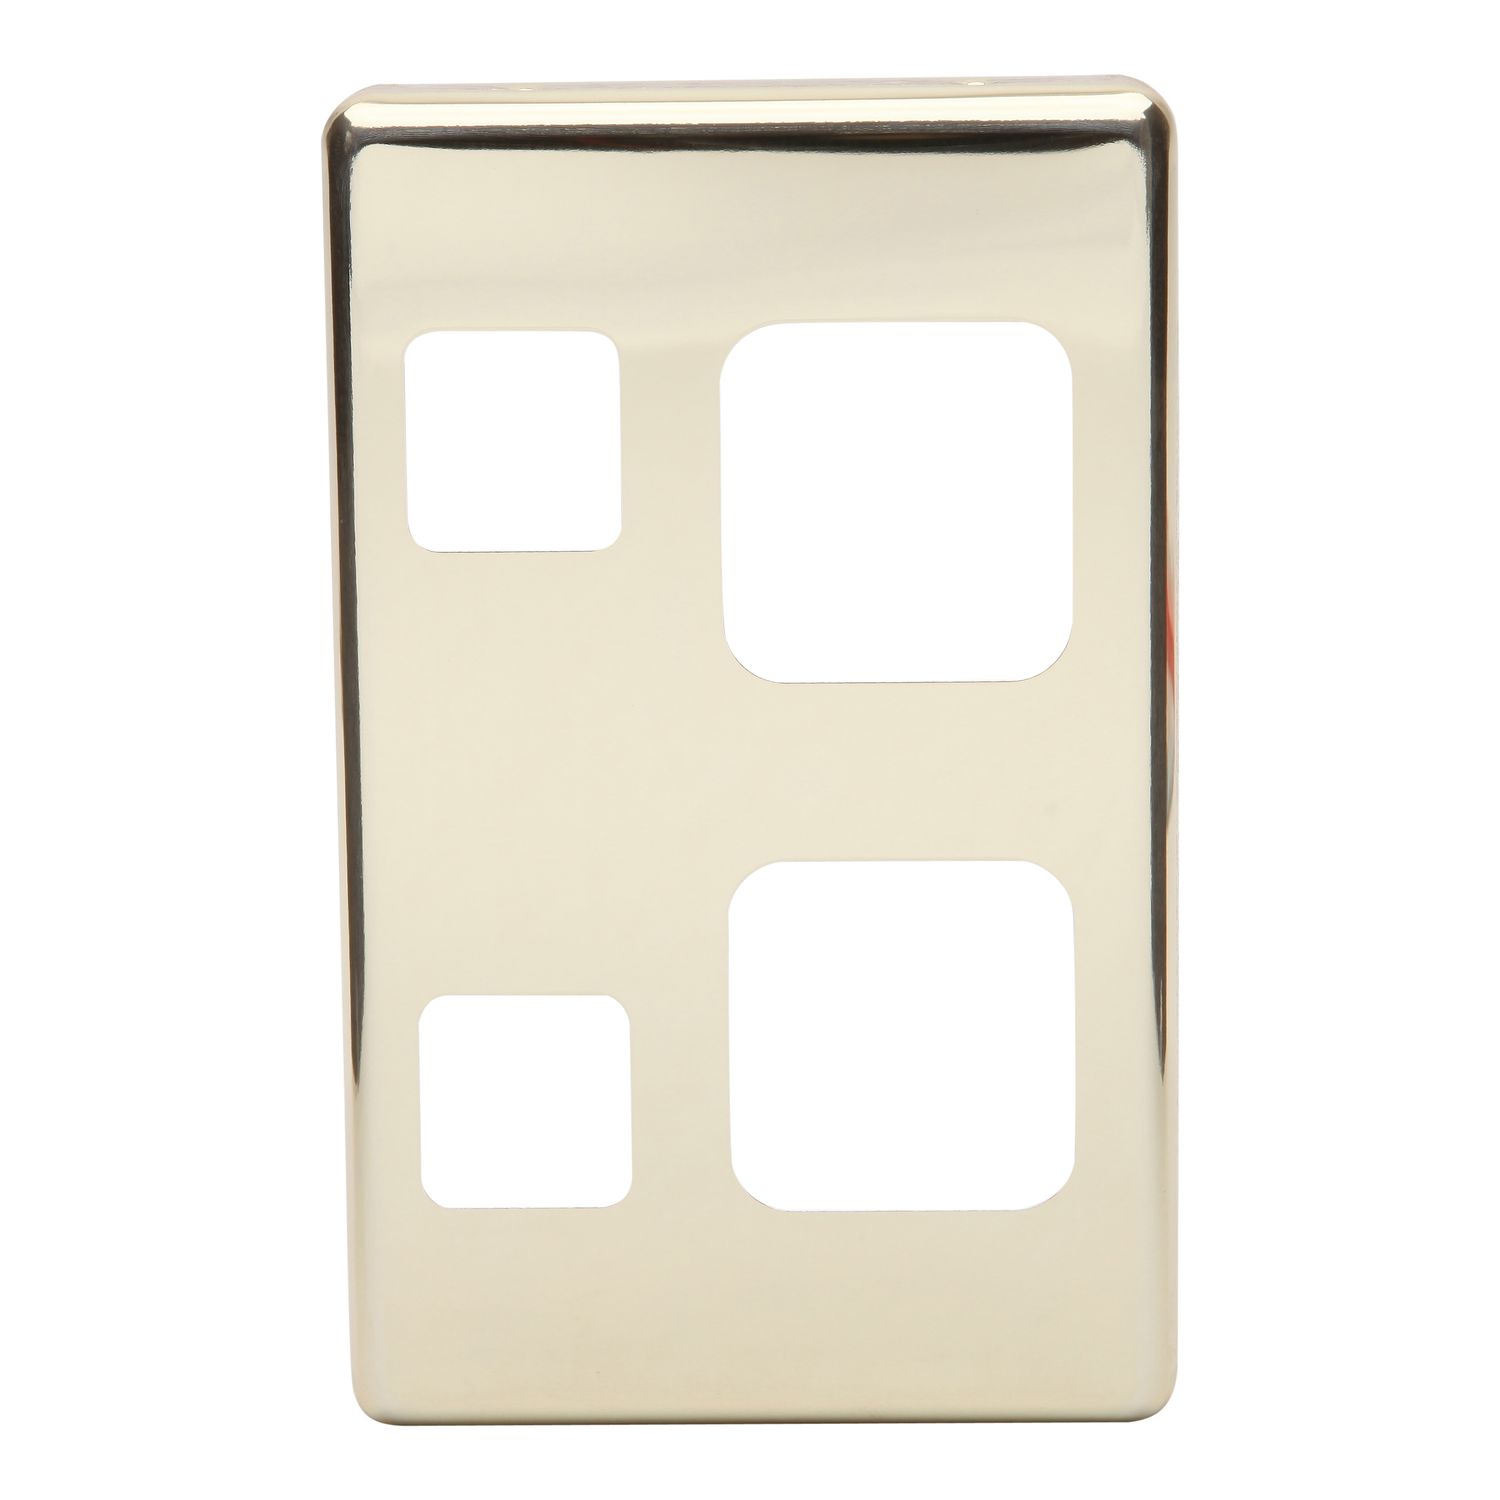 PDL 600 Series - Cover Plate Double Switched Socket Vertical - Polished Brass